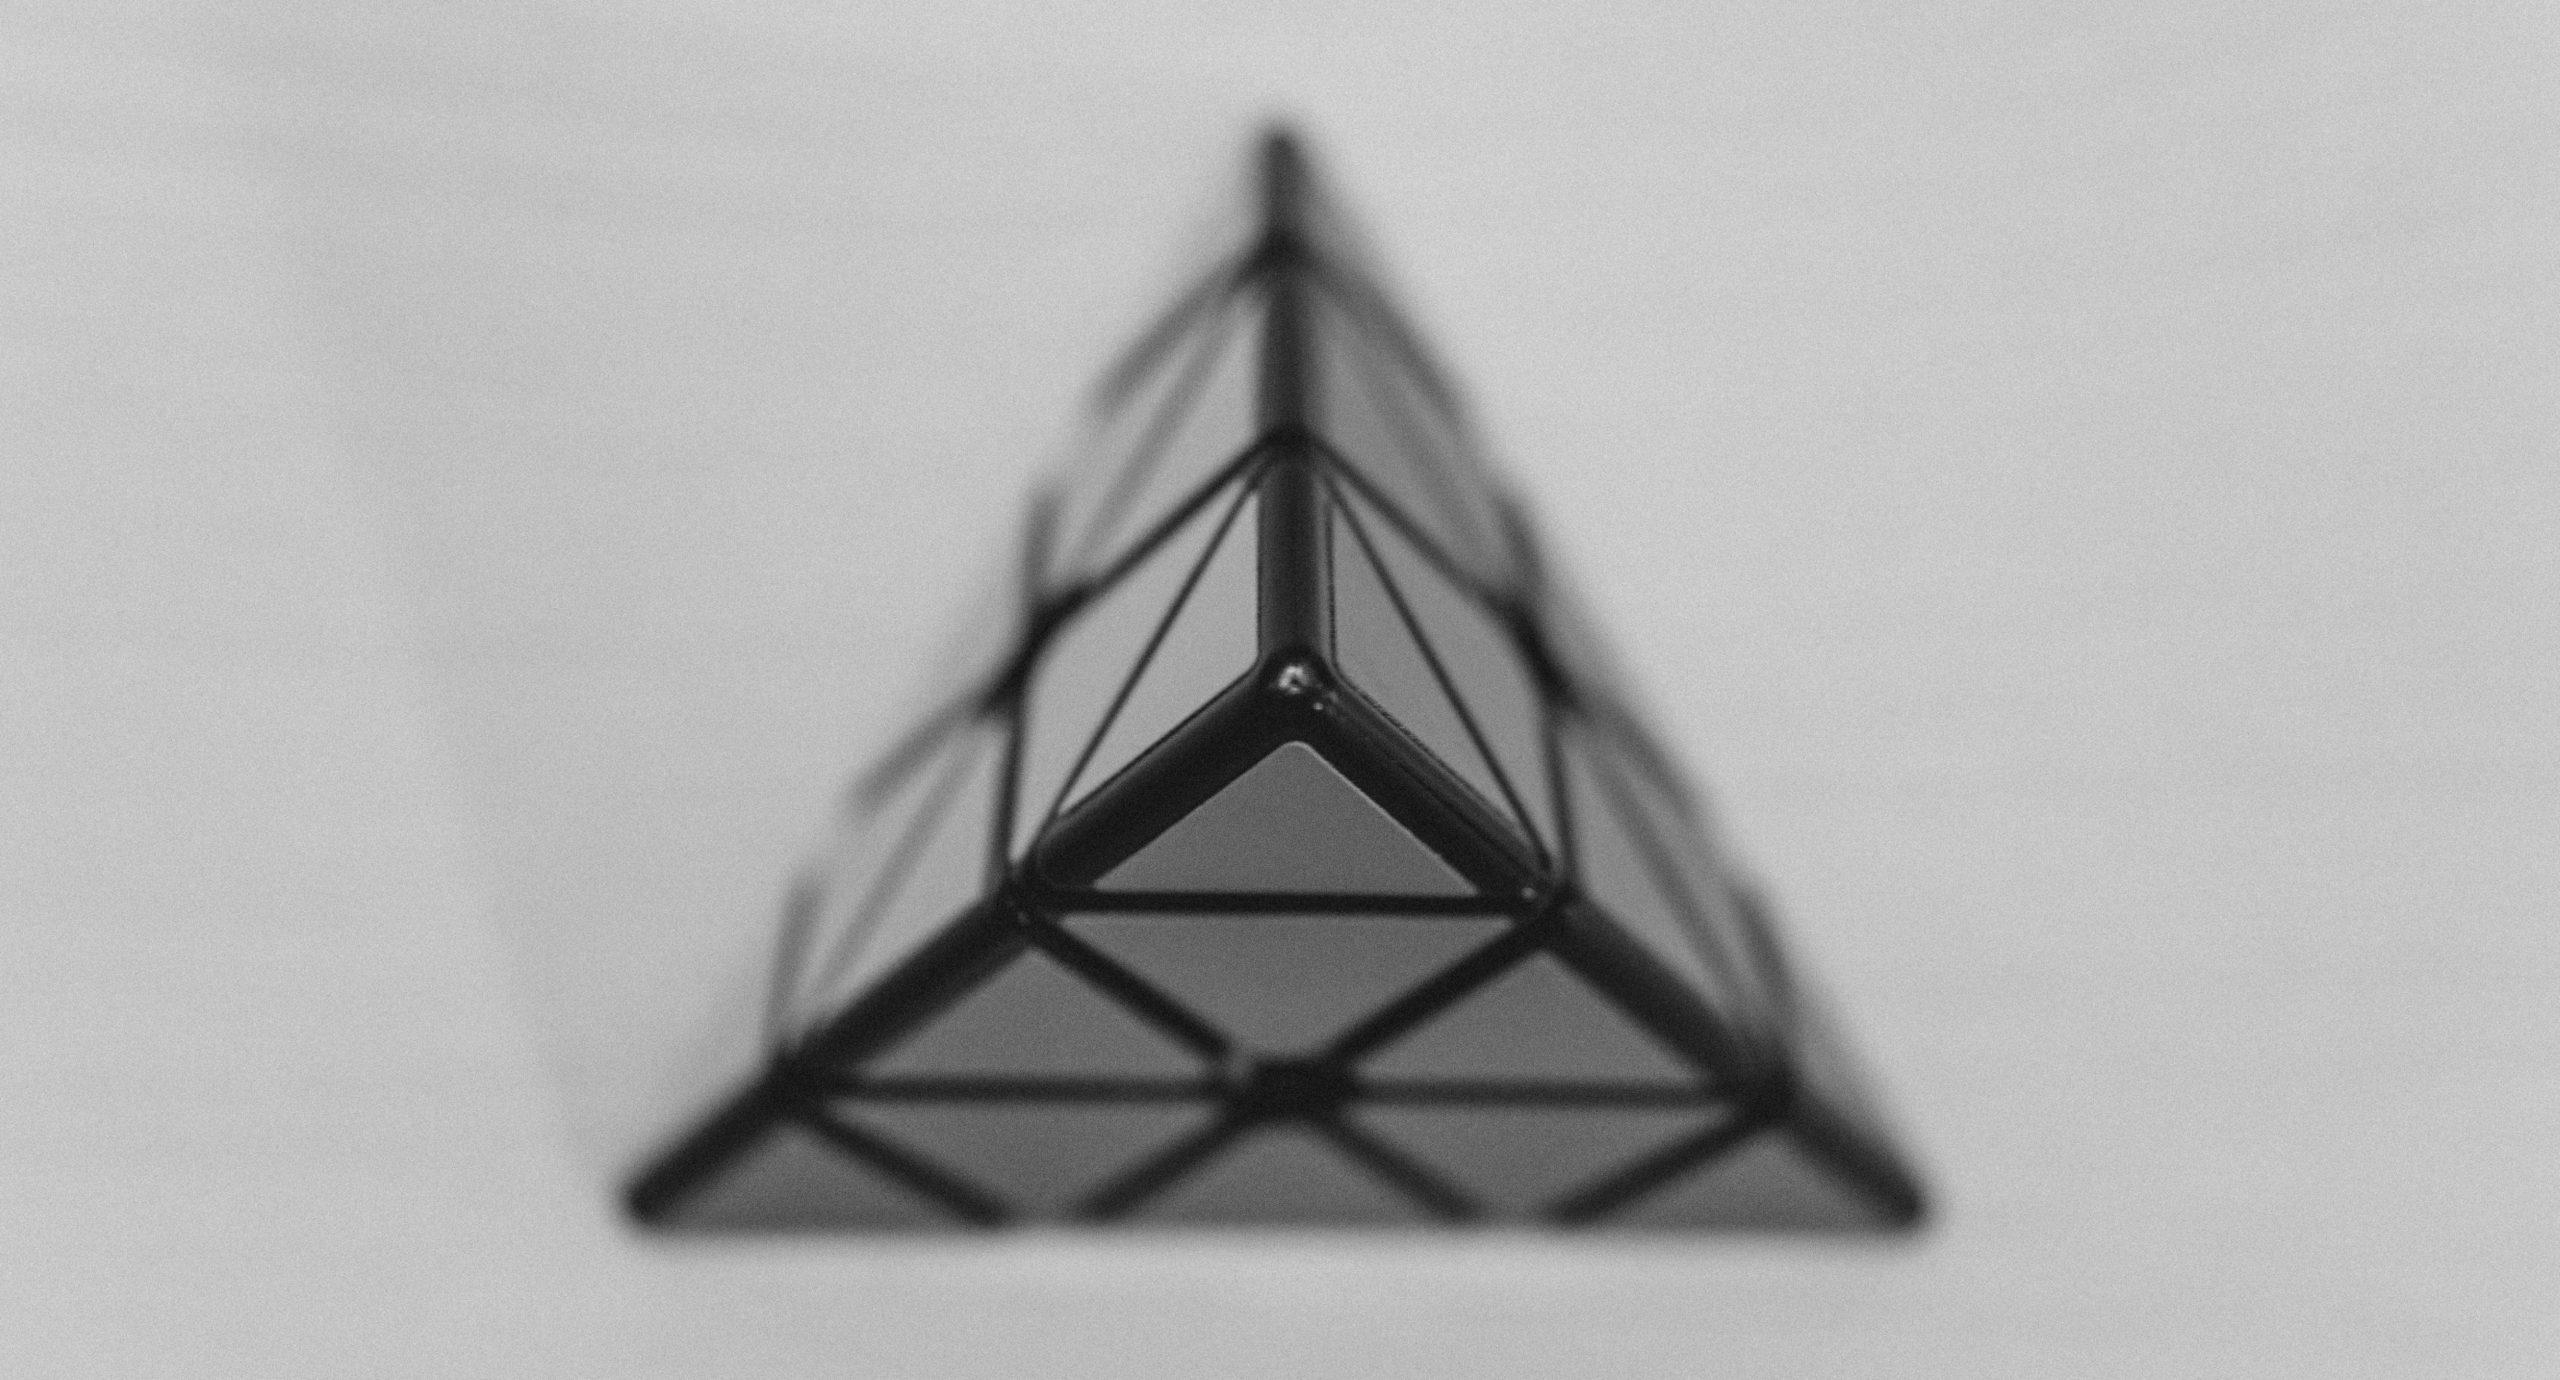 Black and white coloured triangle against a white background.